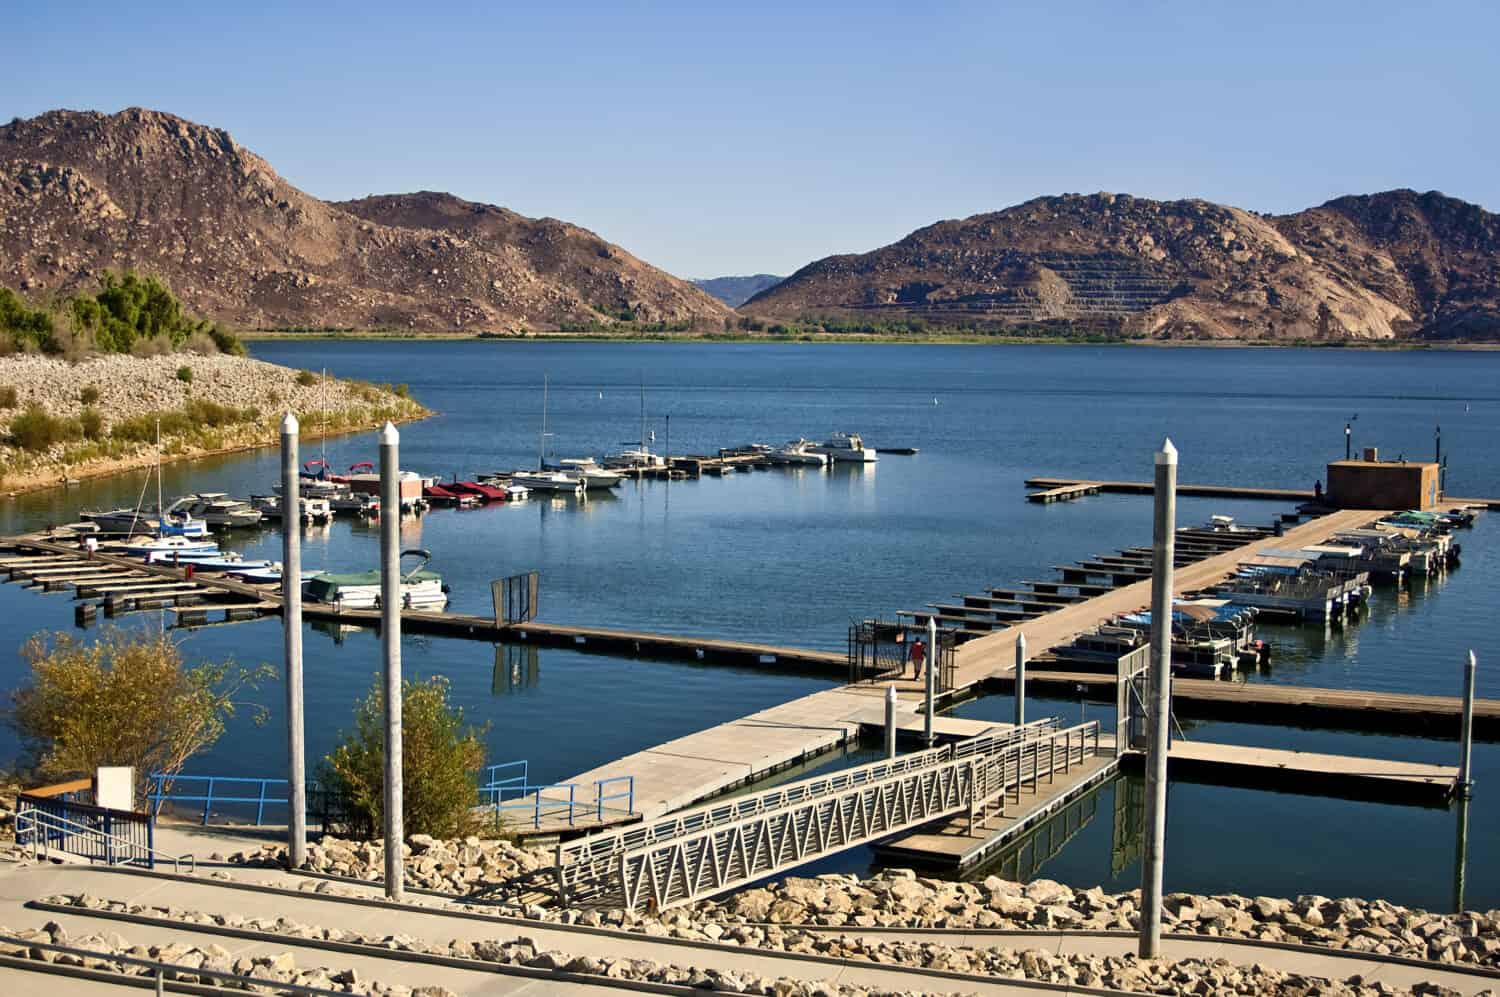 The Marina at Lake Perris State Park in Moreno Valley, California - one of the most popular lakes in Southern California.